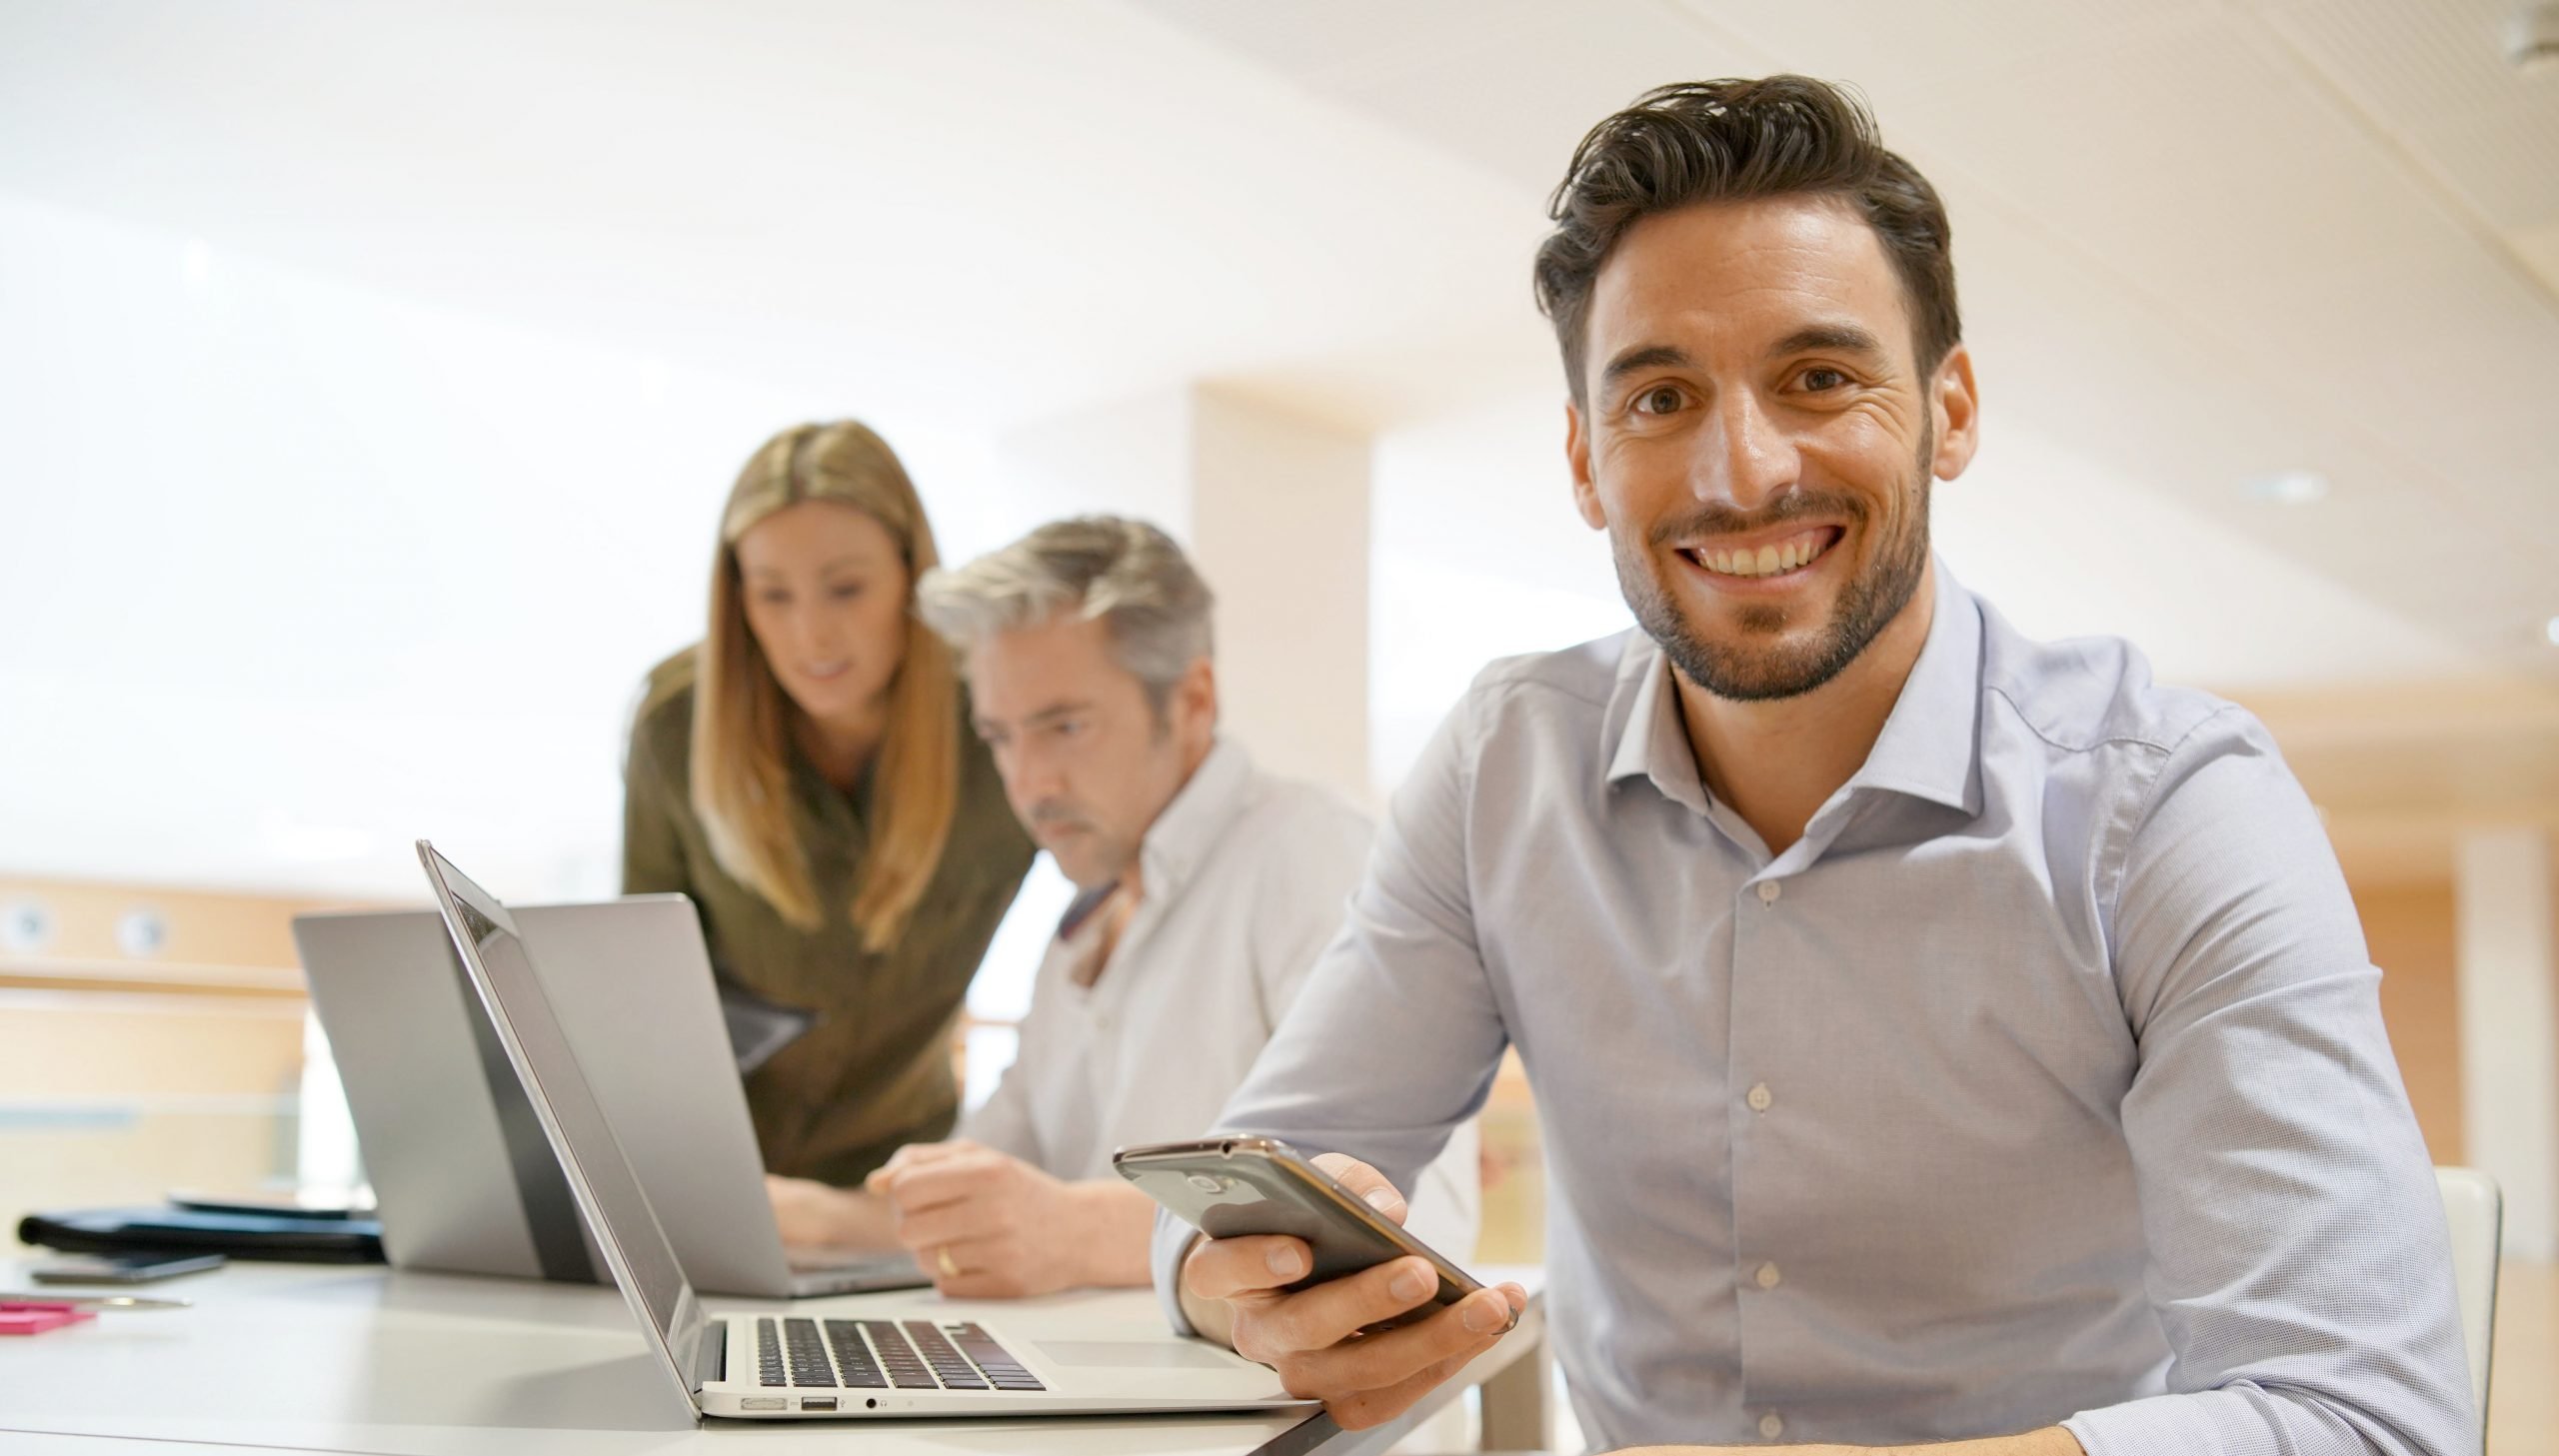 Startup team member smiling at camera in office